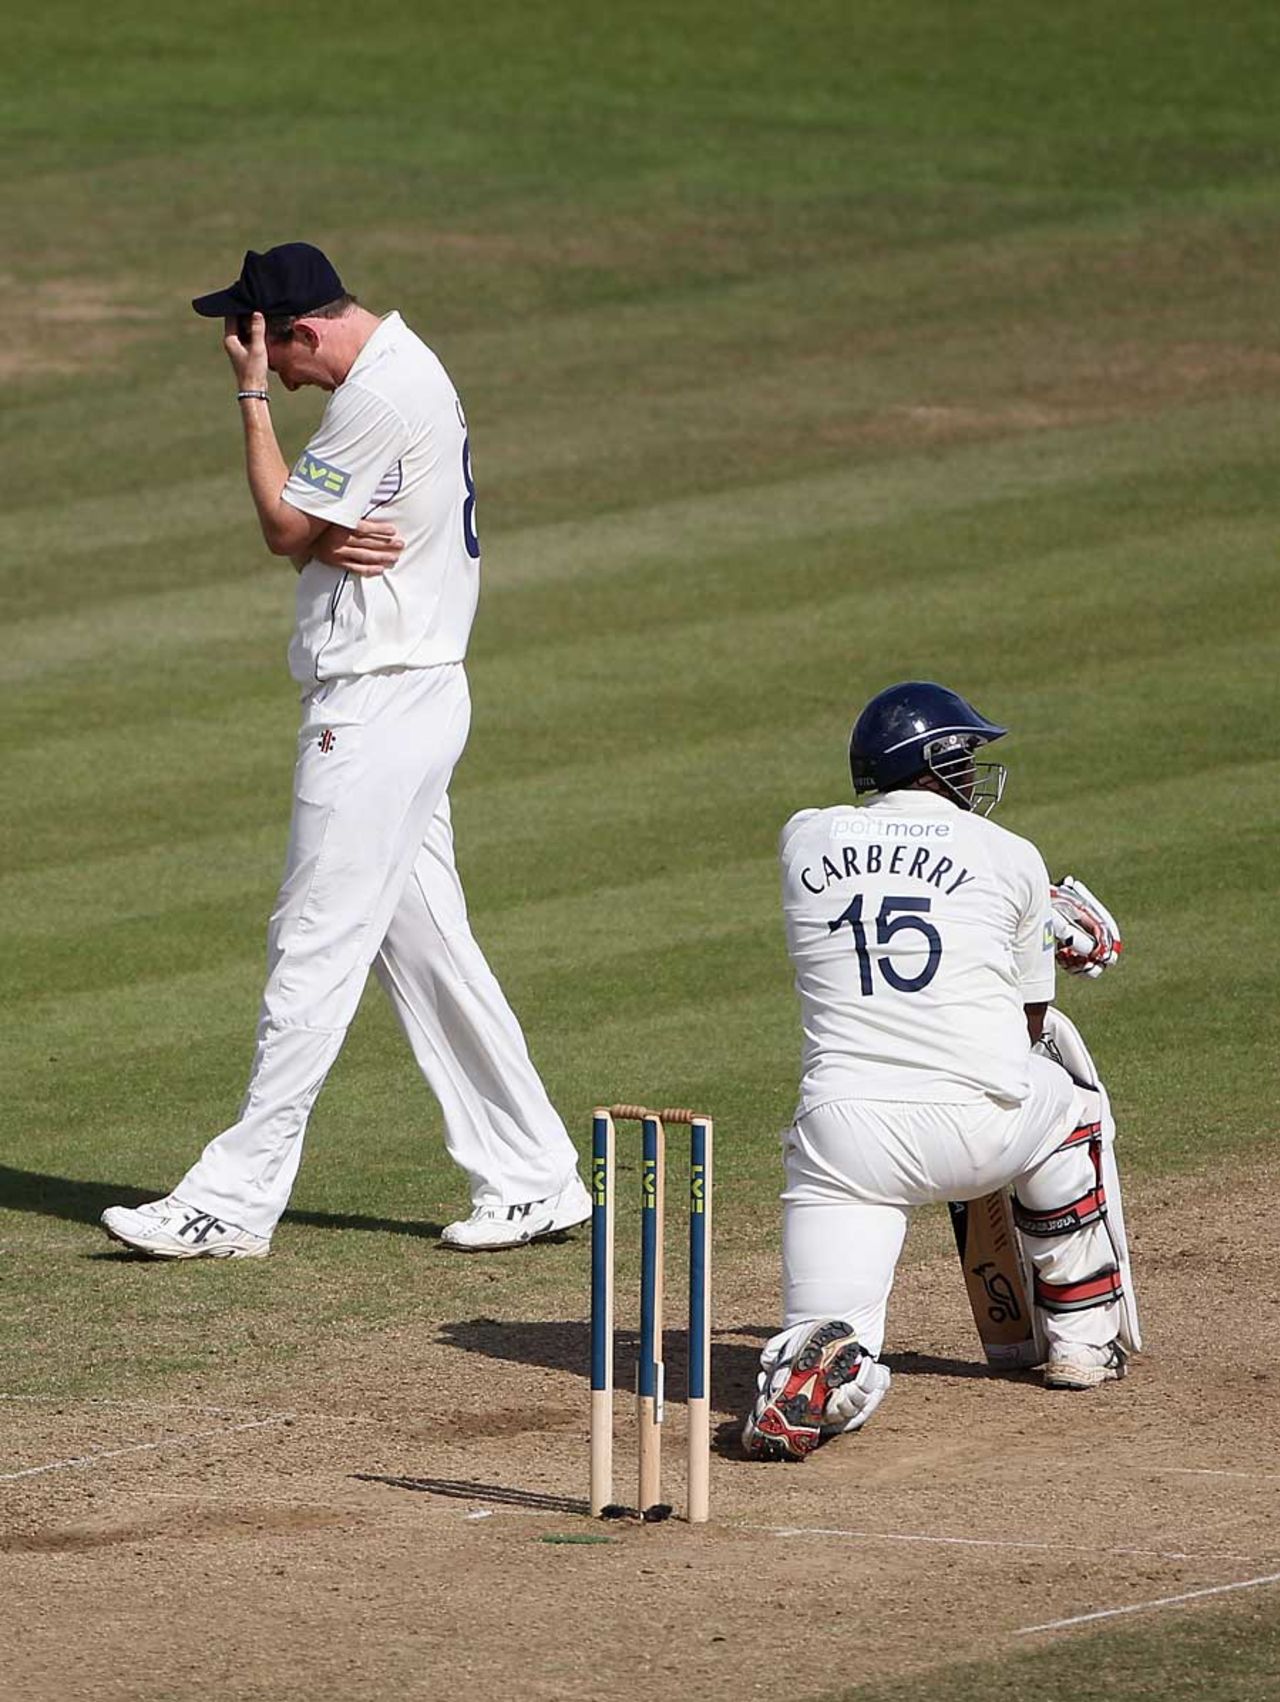 It was a frustrating morning for Warwickshire as Michael Carberry dug in, Hampshire v Warwickshire, County Championship, Division One, September 15, 2011